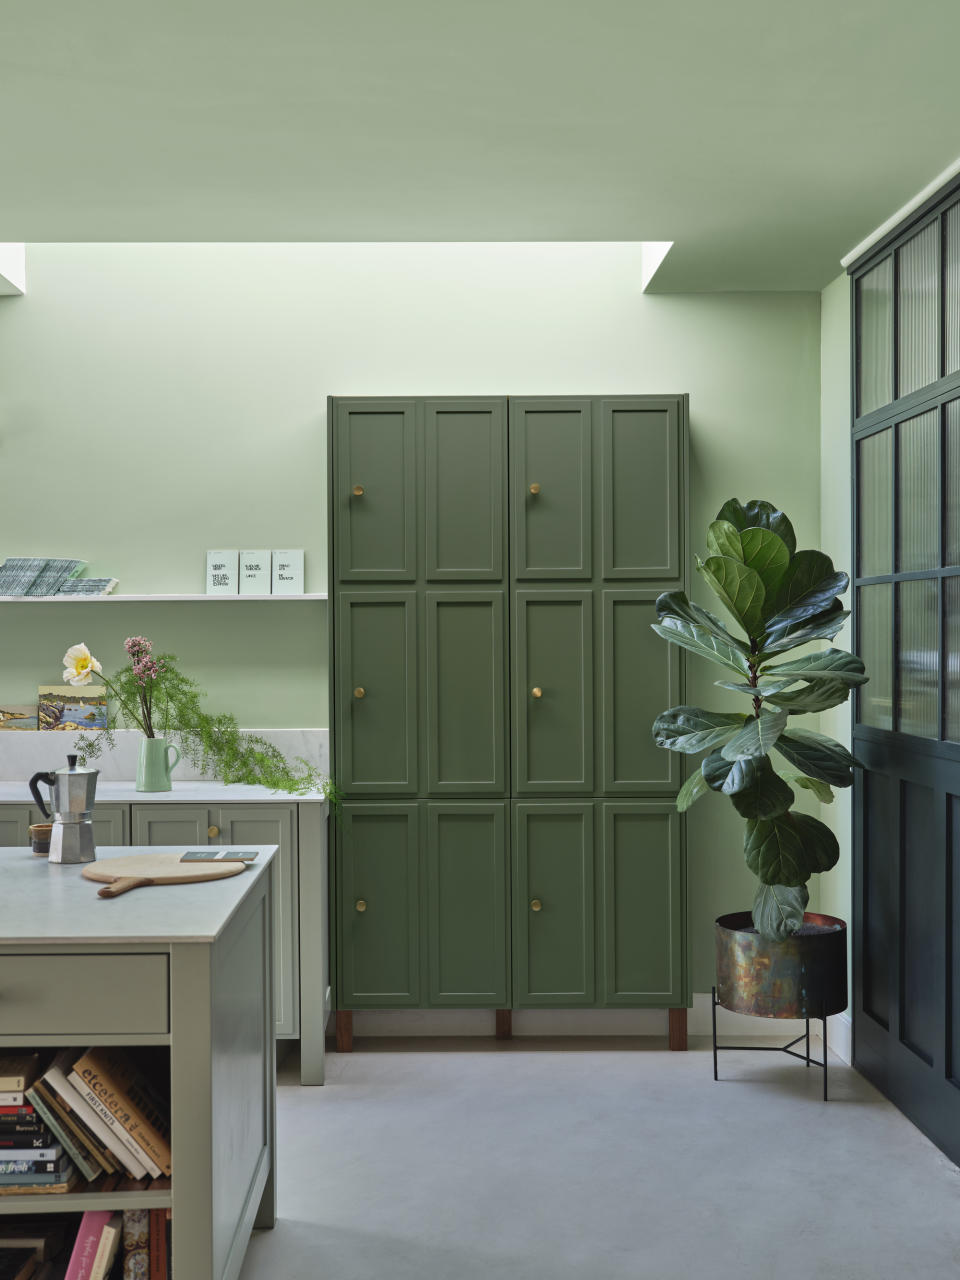 A kitchen with light green walls and a dark green pantry